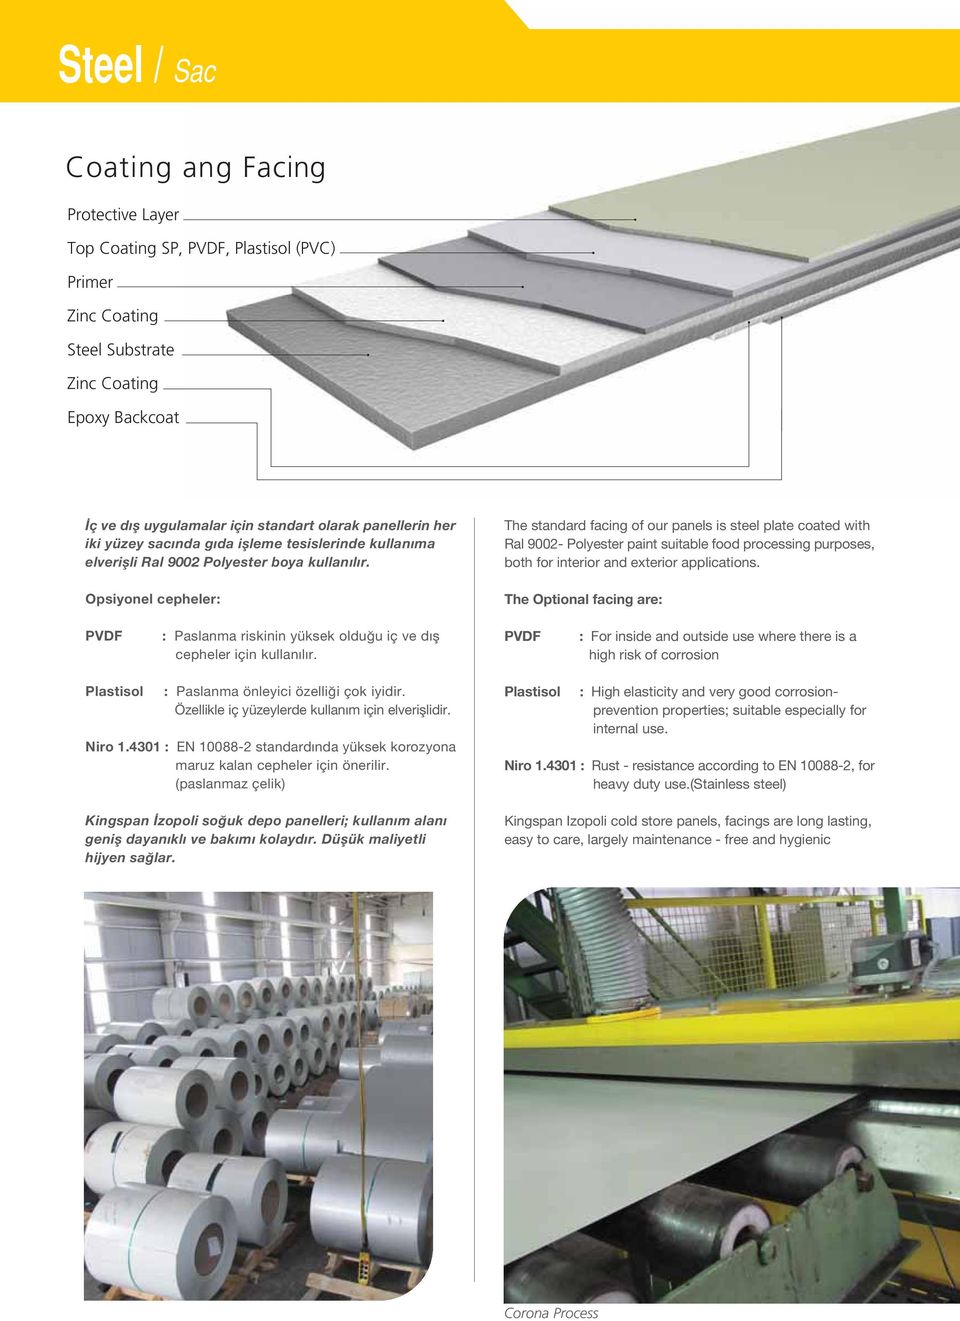 Opsiyonel cepheler: The standard facing of our panels is steel plate coated with Ral 9002- olyester paint suitable food processing purposes, both for interior and exterior applications.